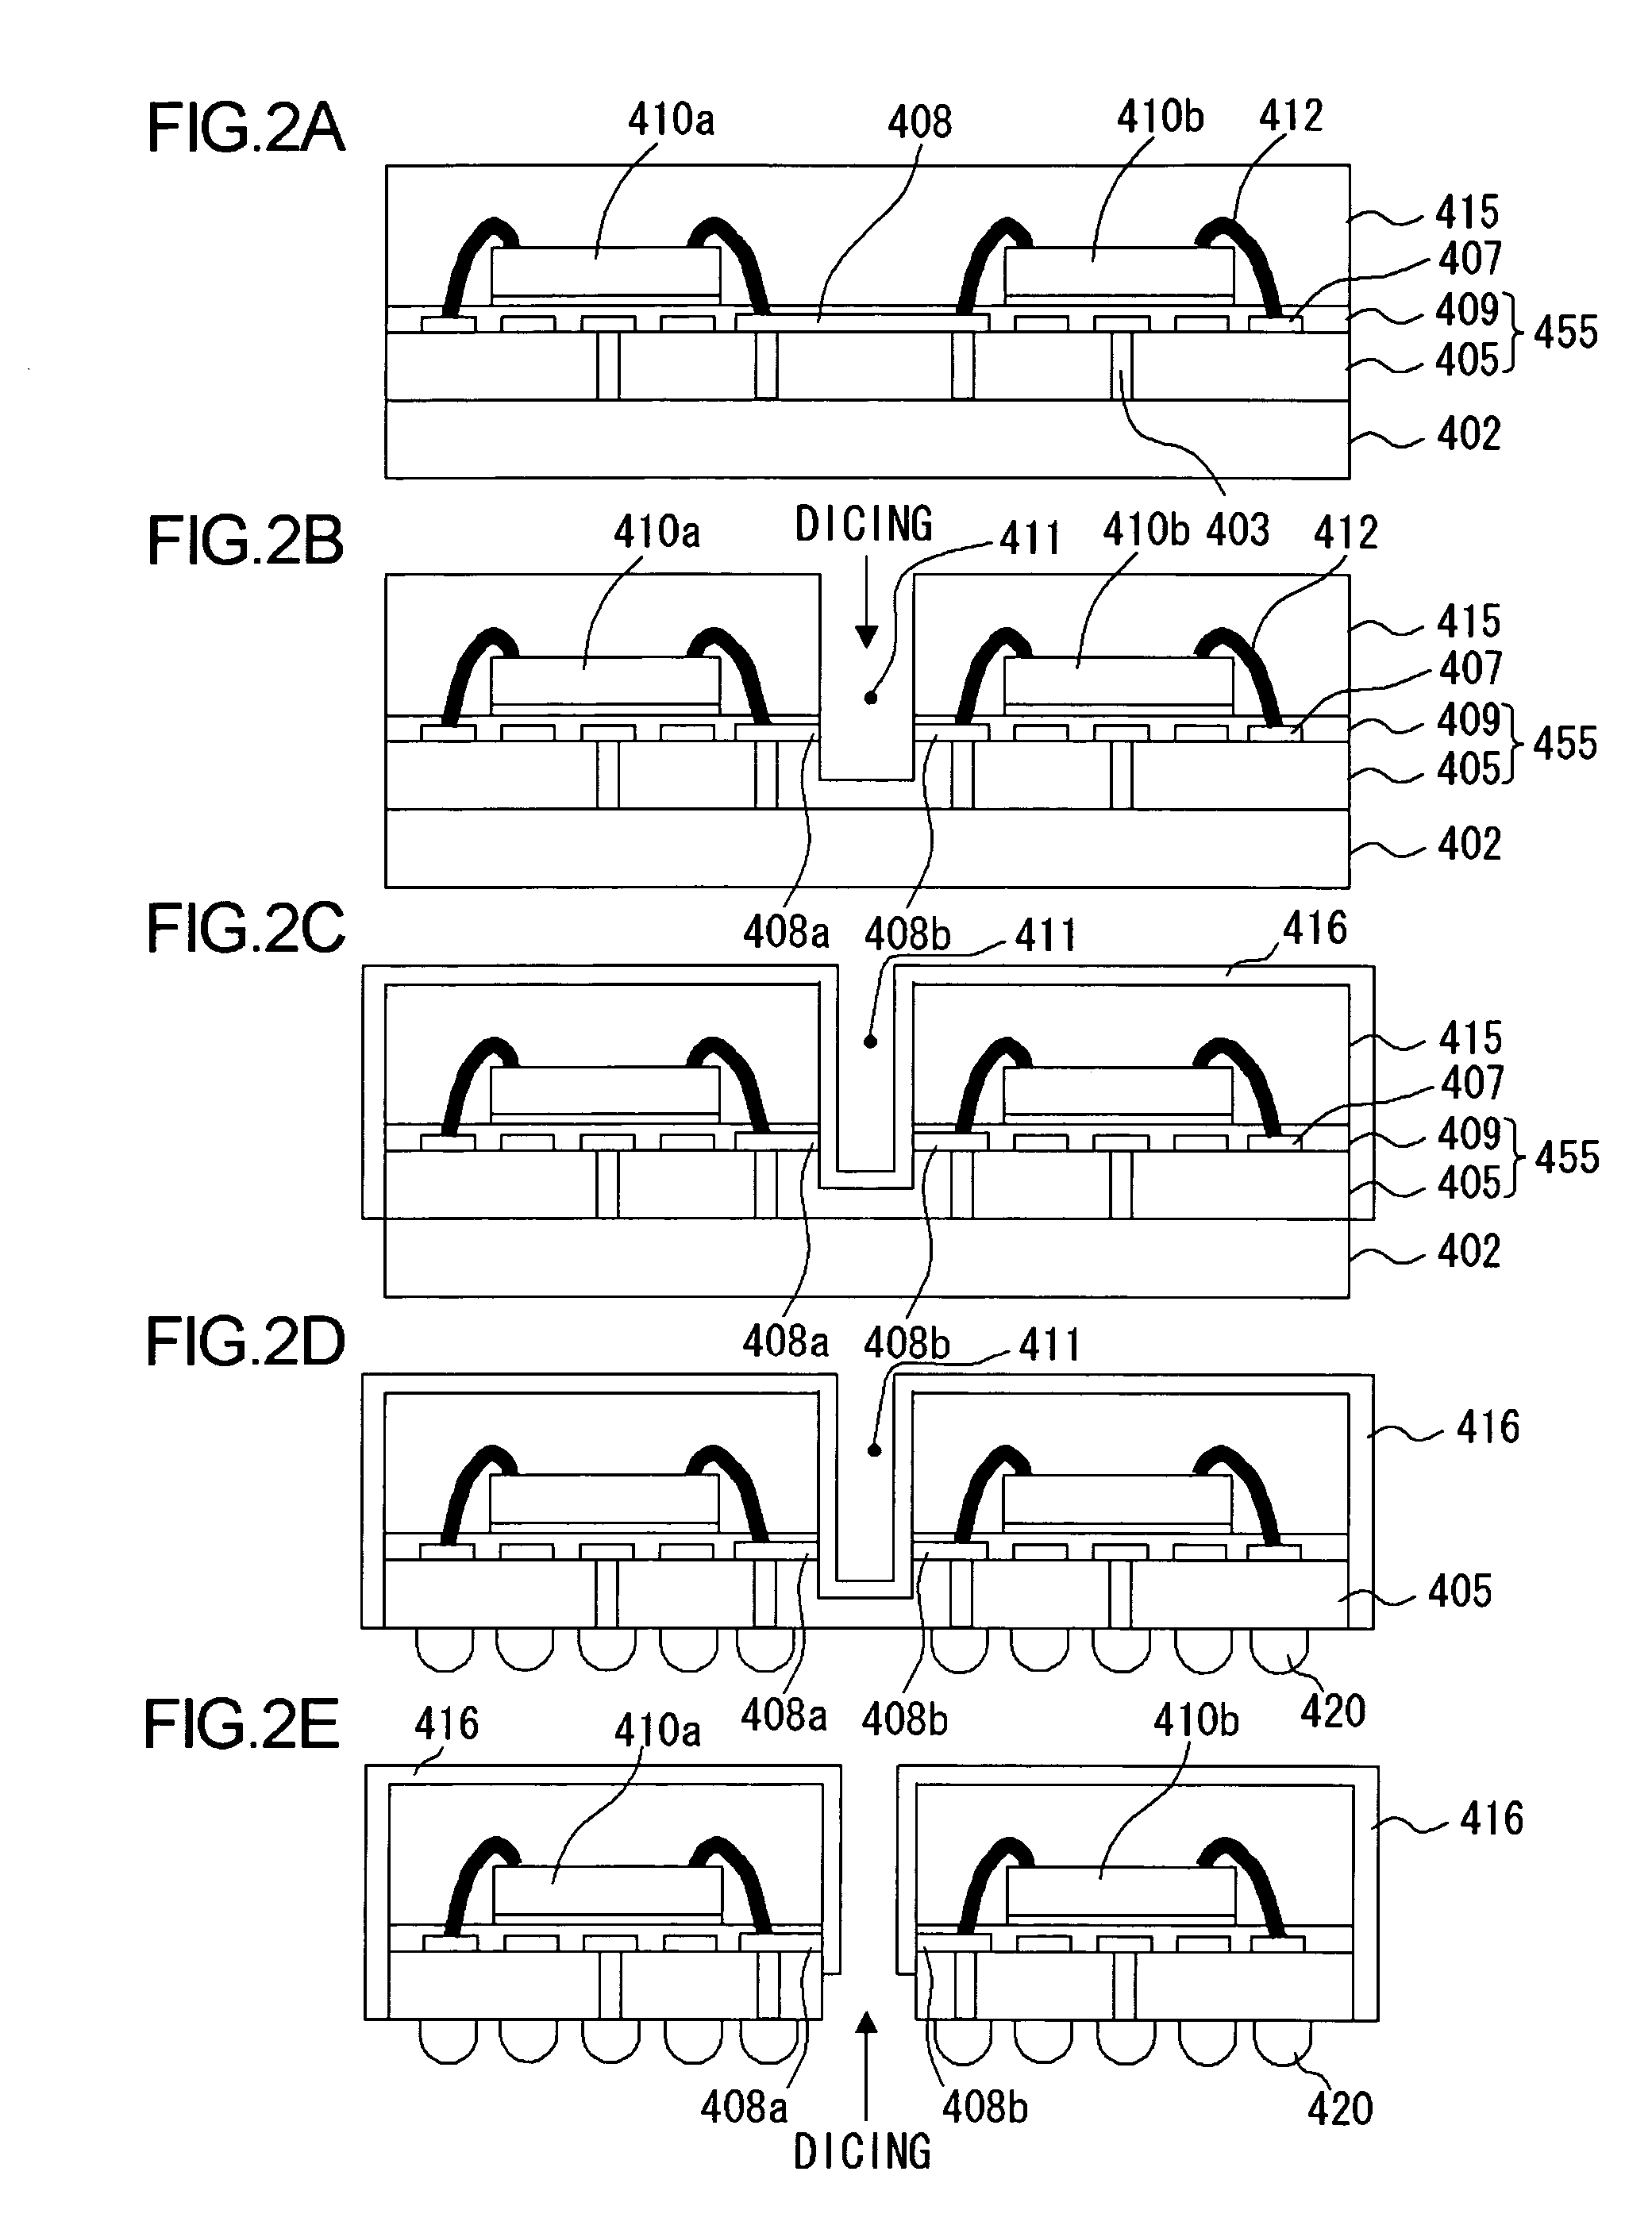 Semiconductor device with shield